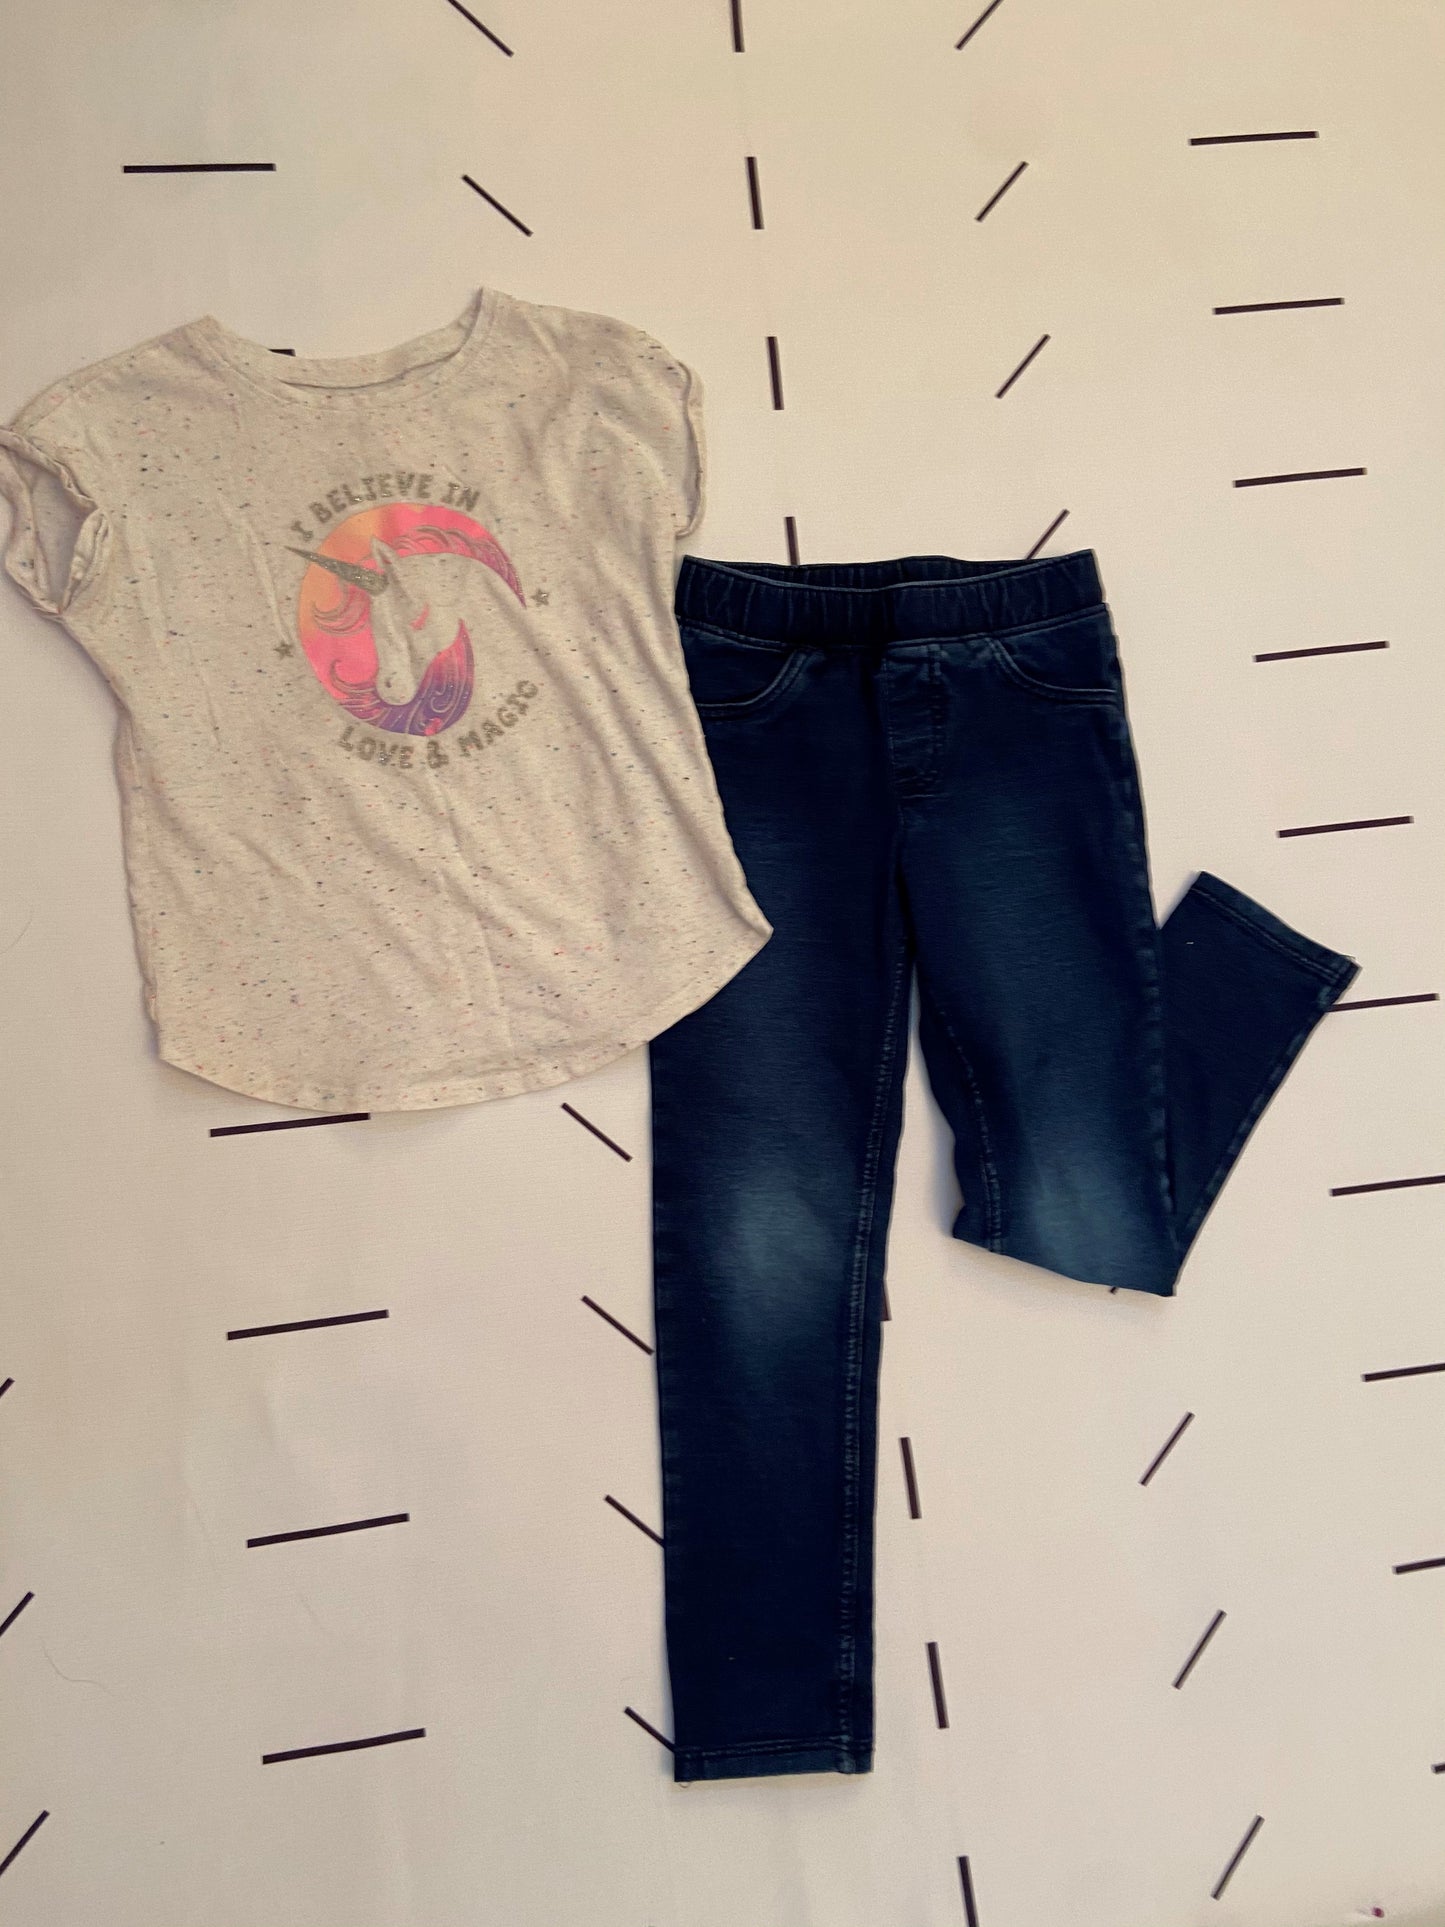 I Believe In Love & Magic T-shirt & Jegging Outfit - 5T